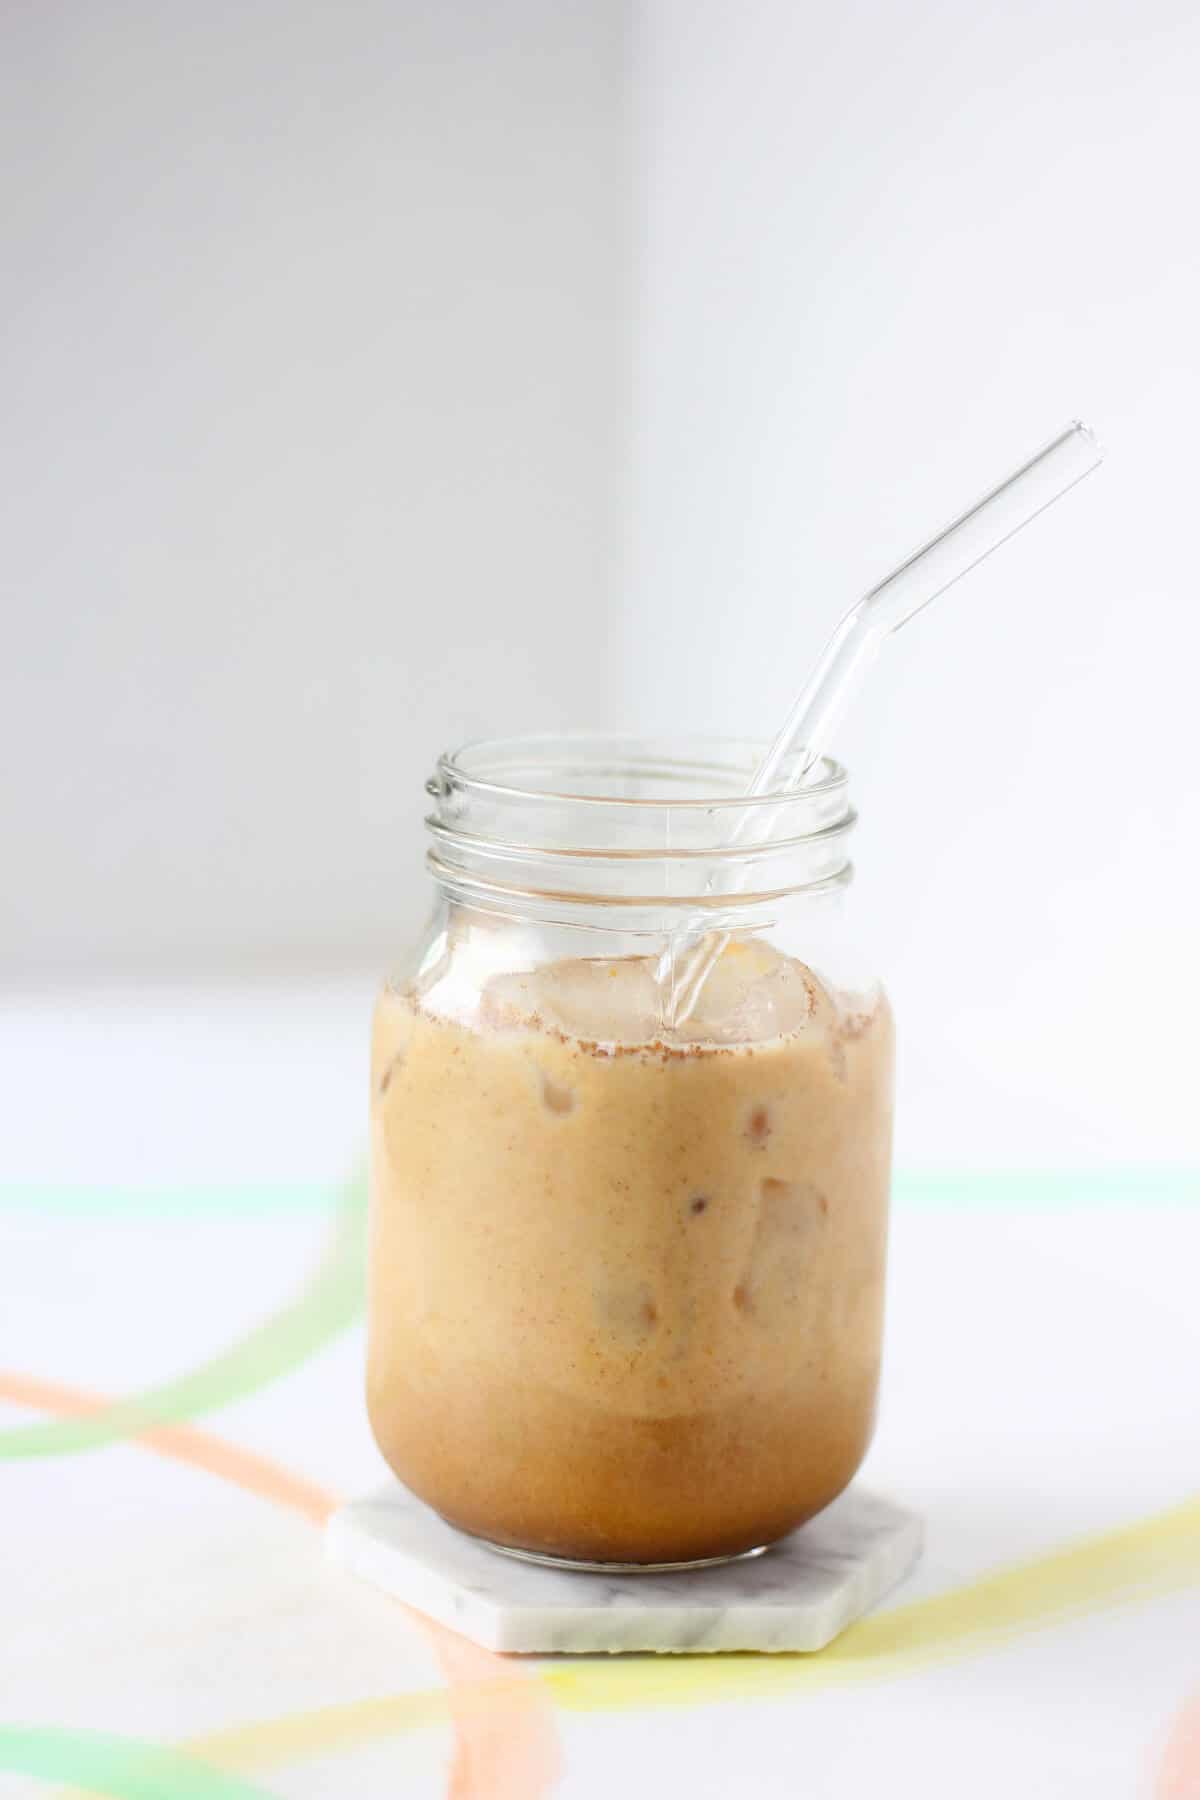 Clear jar filled with ice and creamy coffee with a clear glass straw.